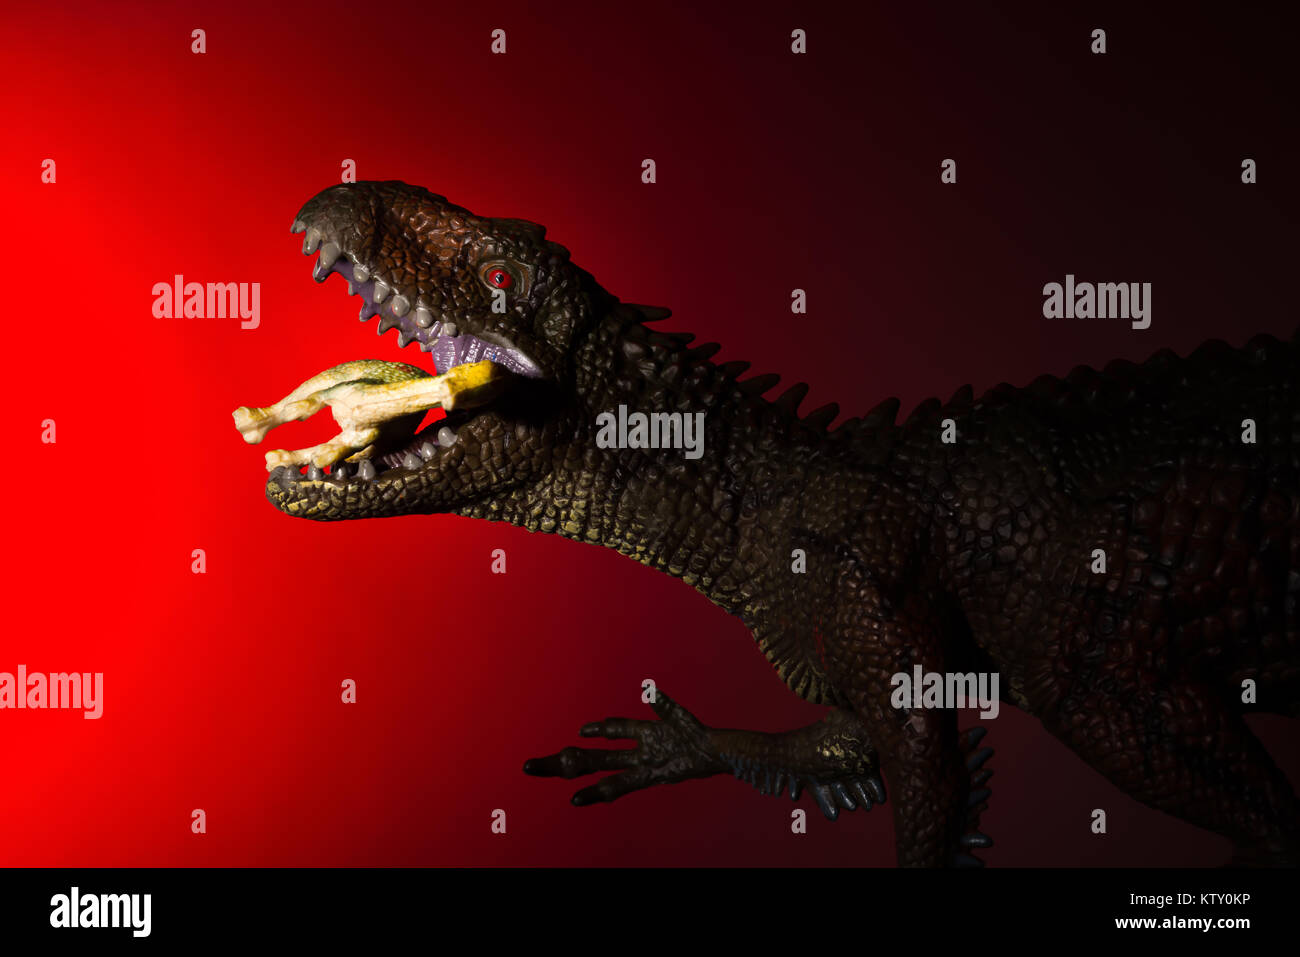 Carcharodontosaurus biting a small dinosaur with spot light on the head and red light on background Stock Photo